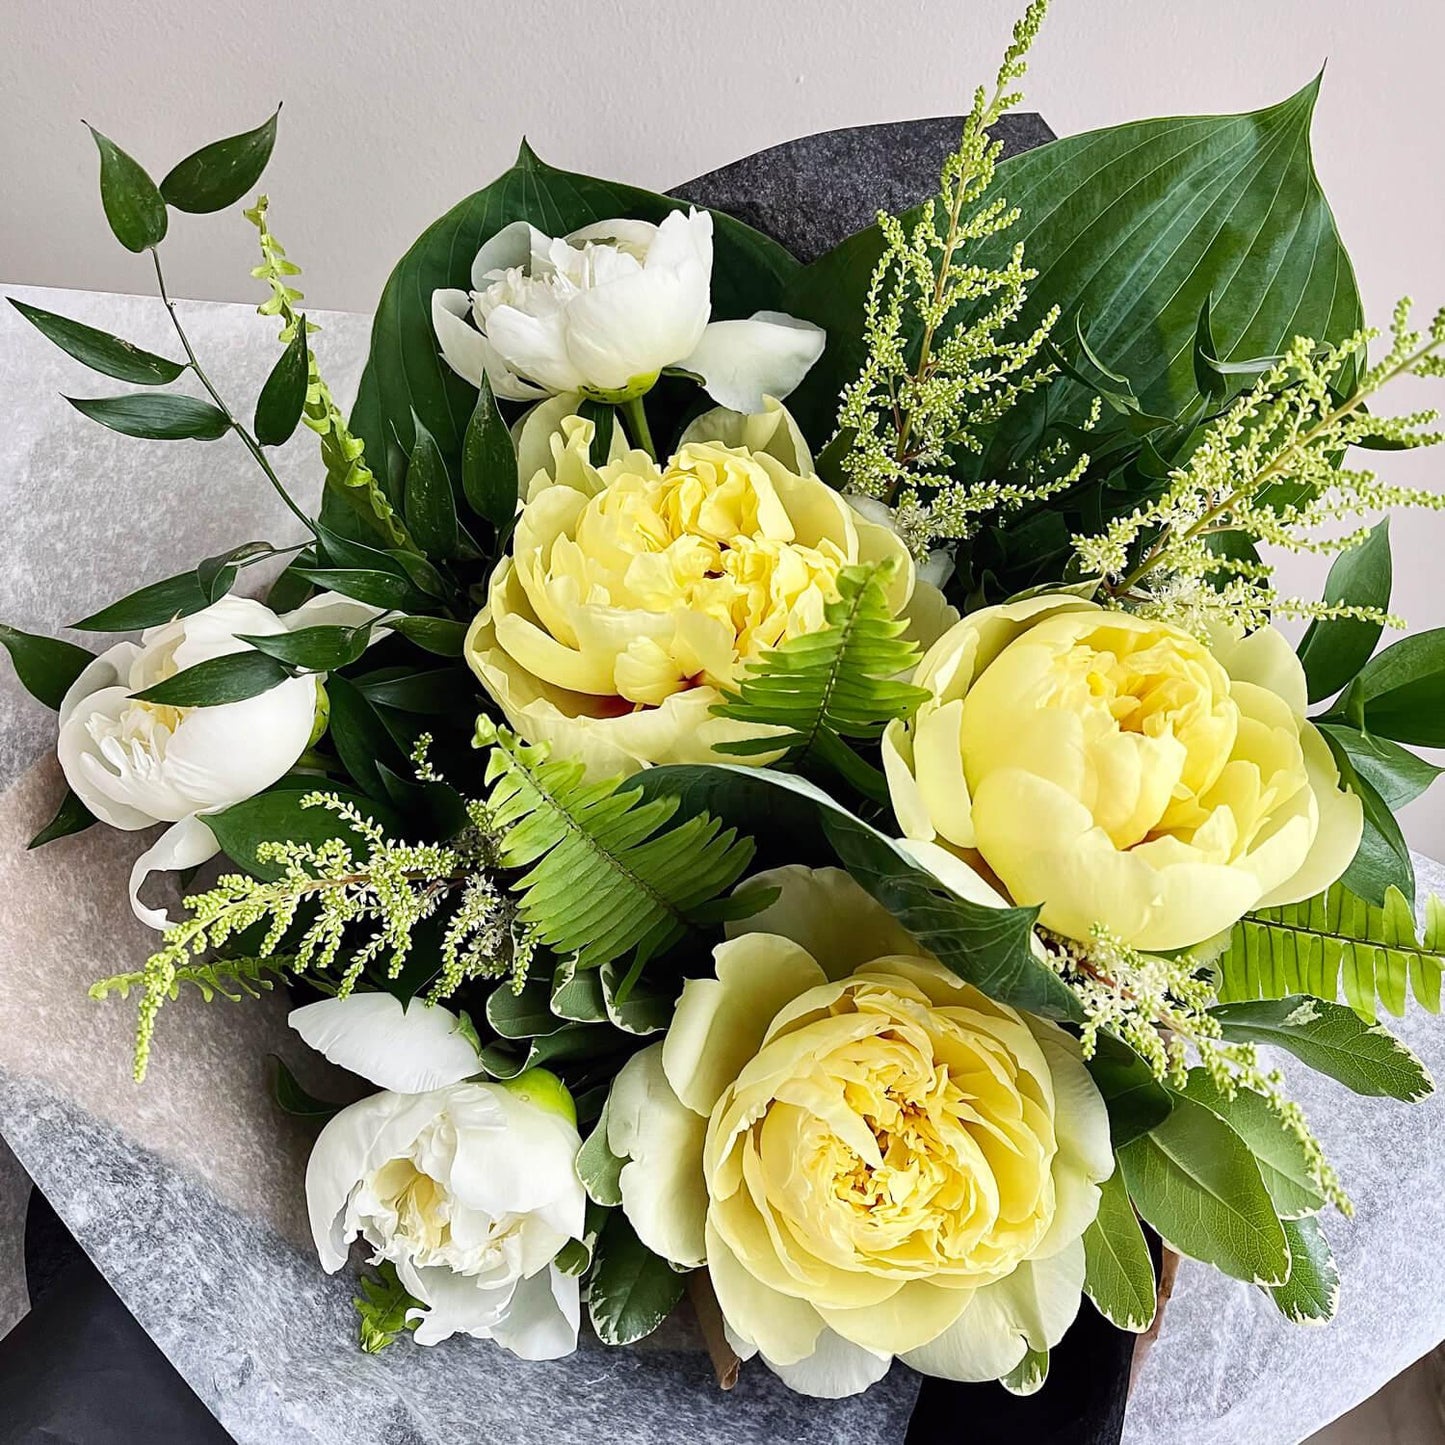 Wonderblooms monthly flower subscription from Quince Flowers, Toronto Florist and flower delivery - yellow and white peonies with beautiful green foliage. Order online for flower & plant subscriptions from the best florist in Toronto near you.